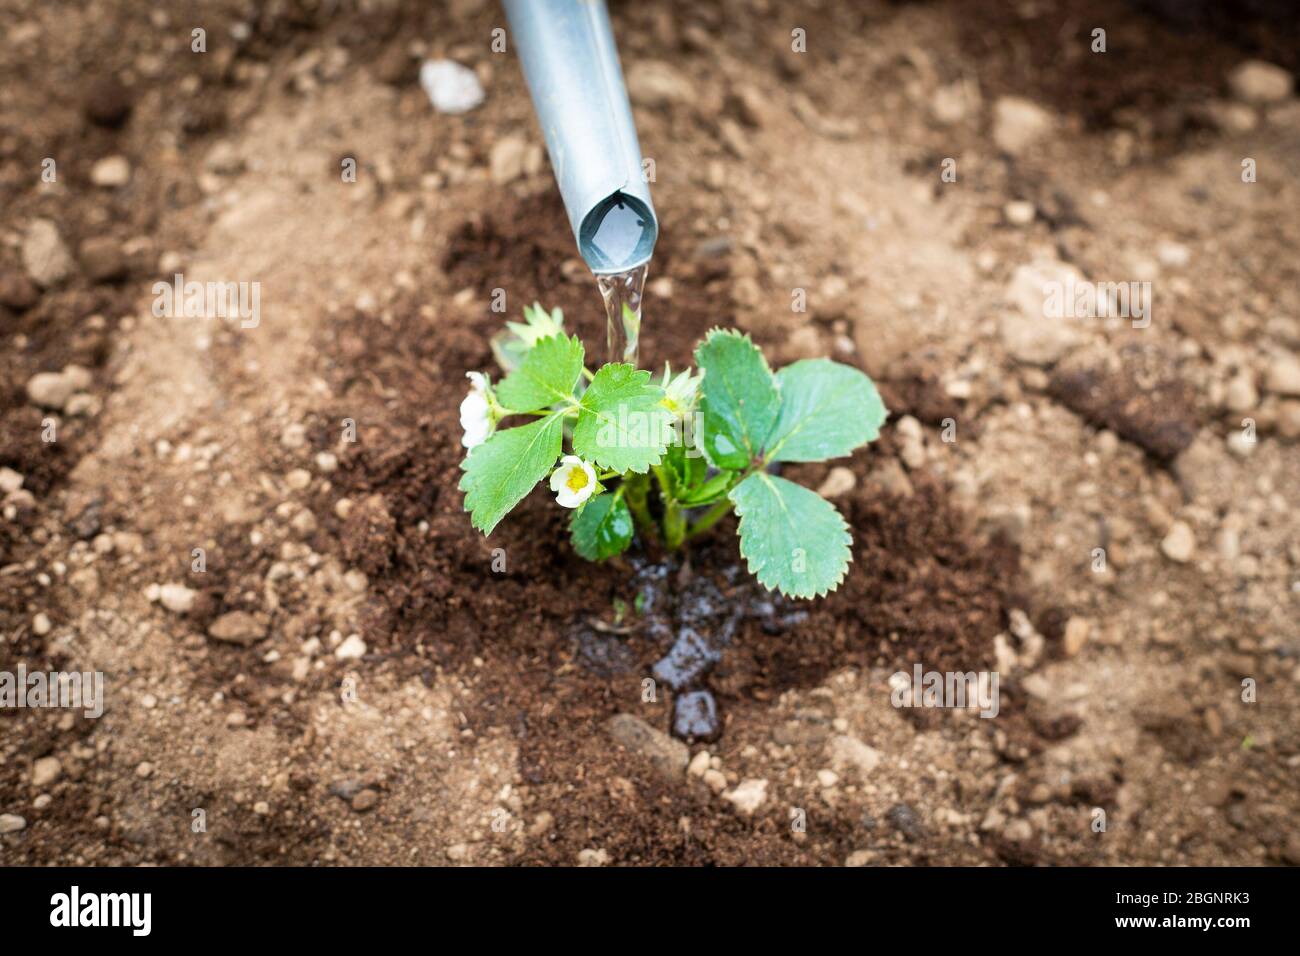 Using a tin watering can on a small strawberry plant. Self-growing fruits and plants in home garden is a good activity idea during covid-19 pandemic l Stock Photo